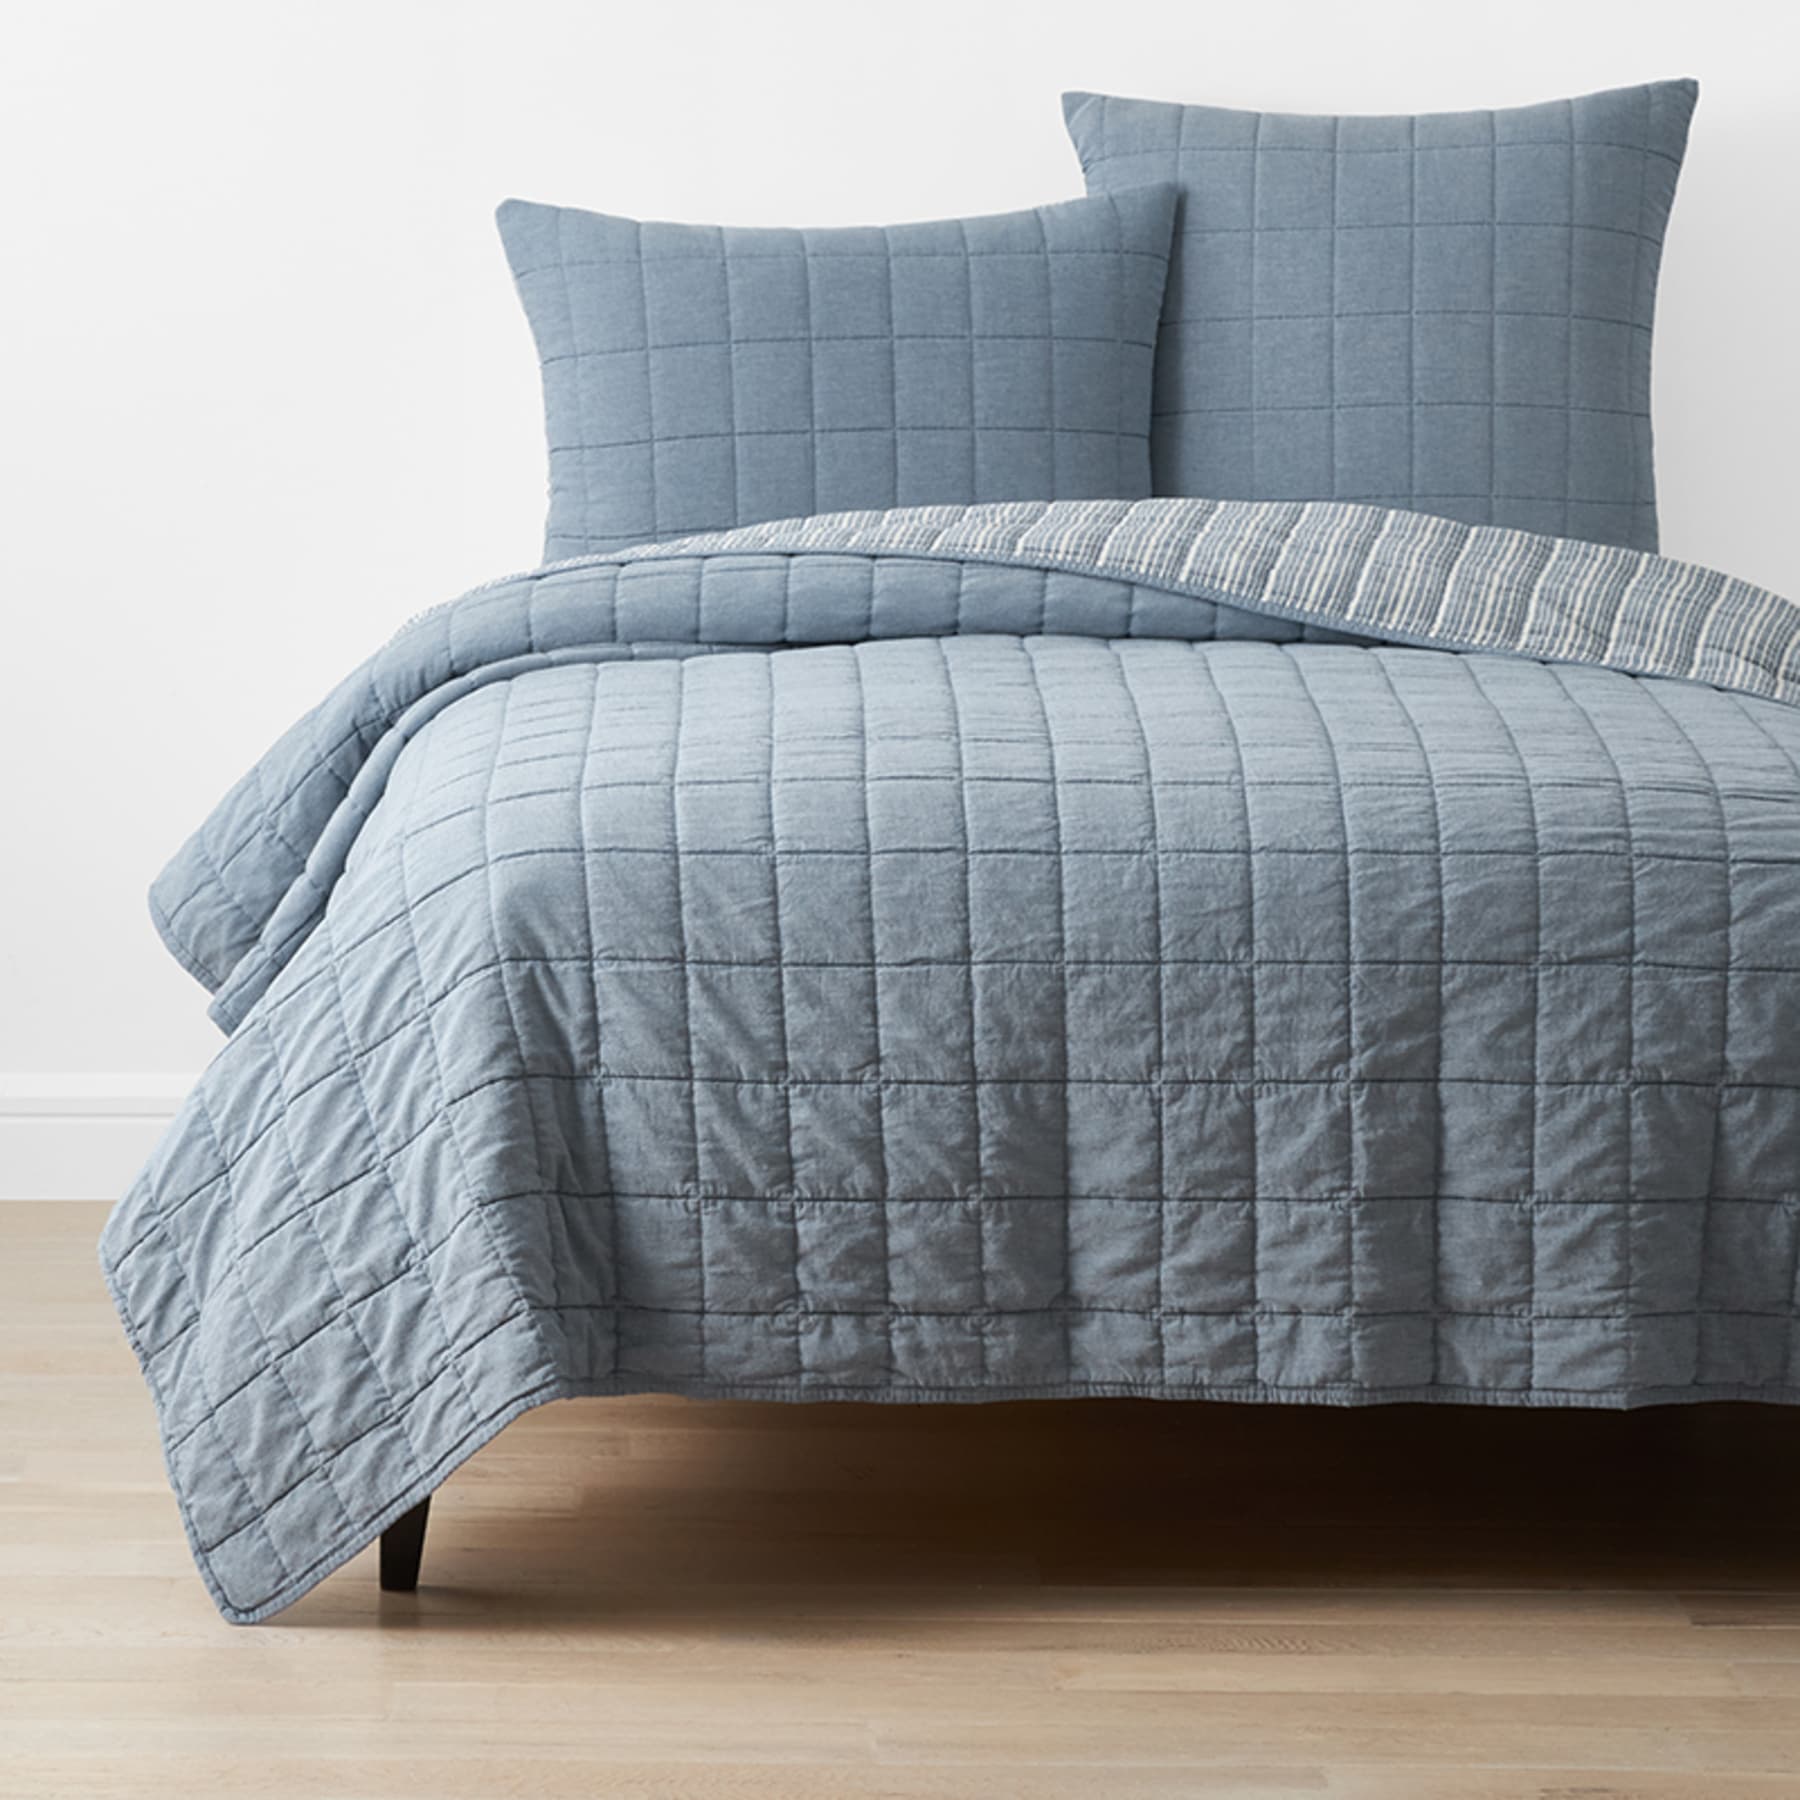 Morgan Quilted Coverlet - Denim Blue | The Company Store